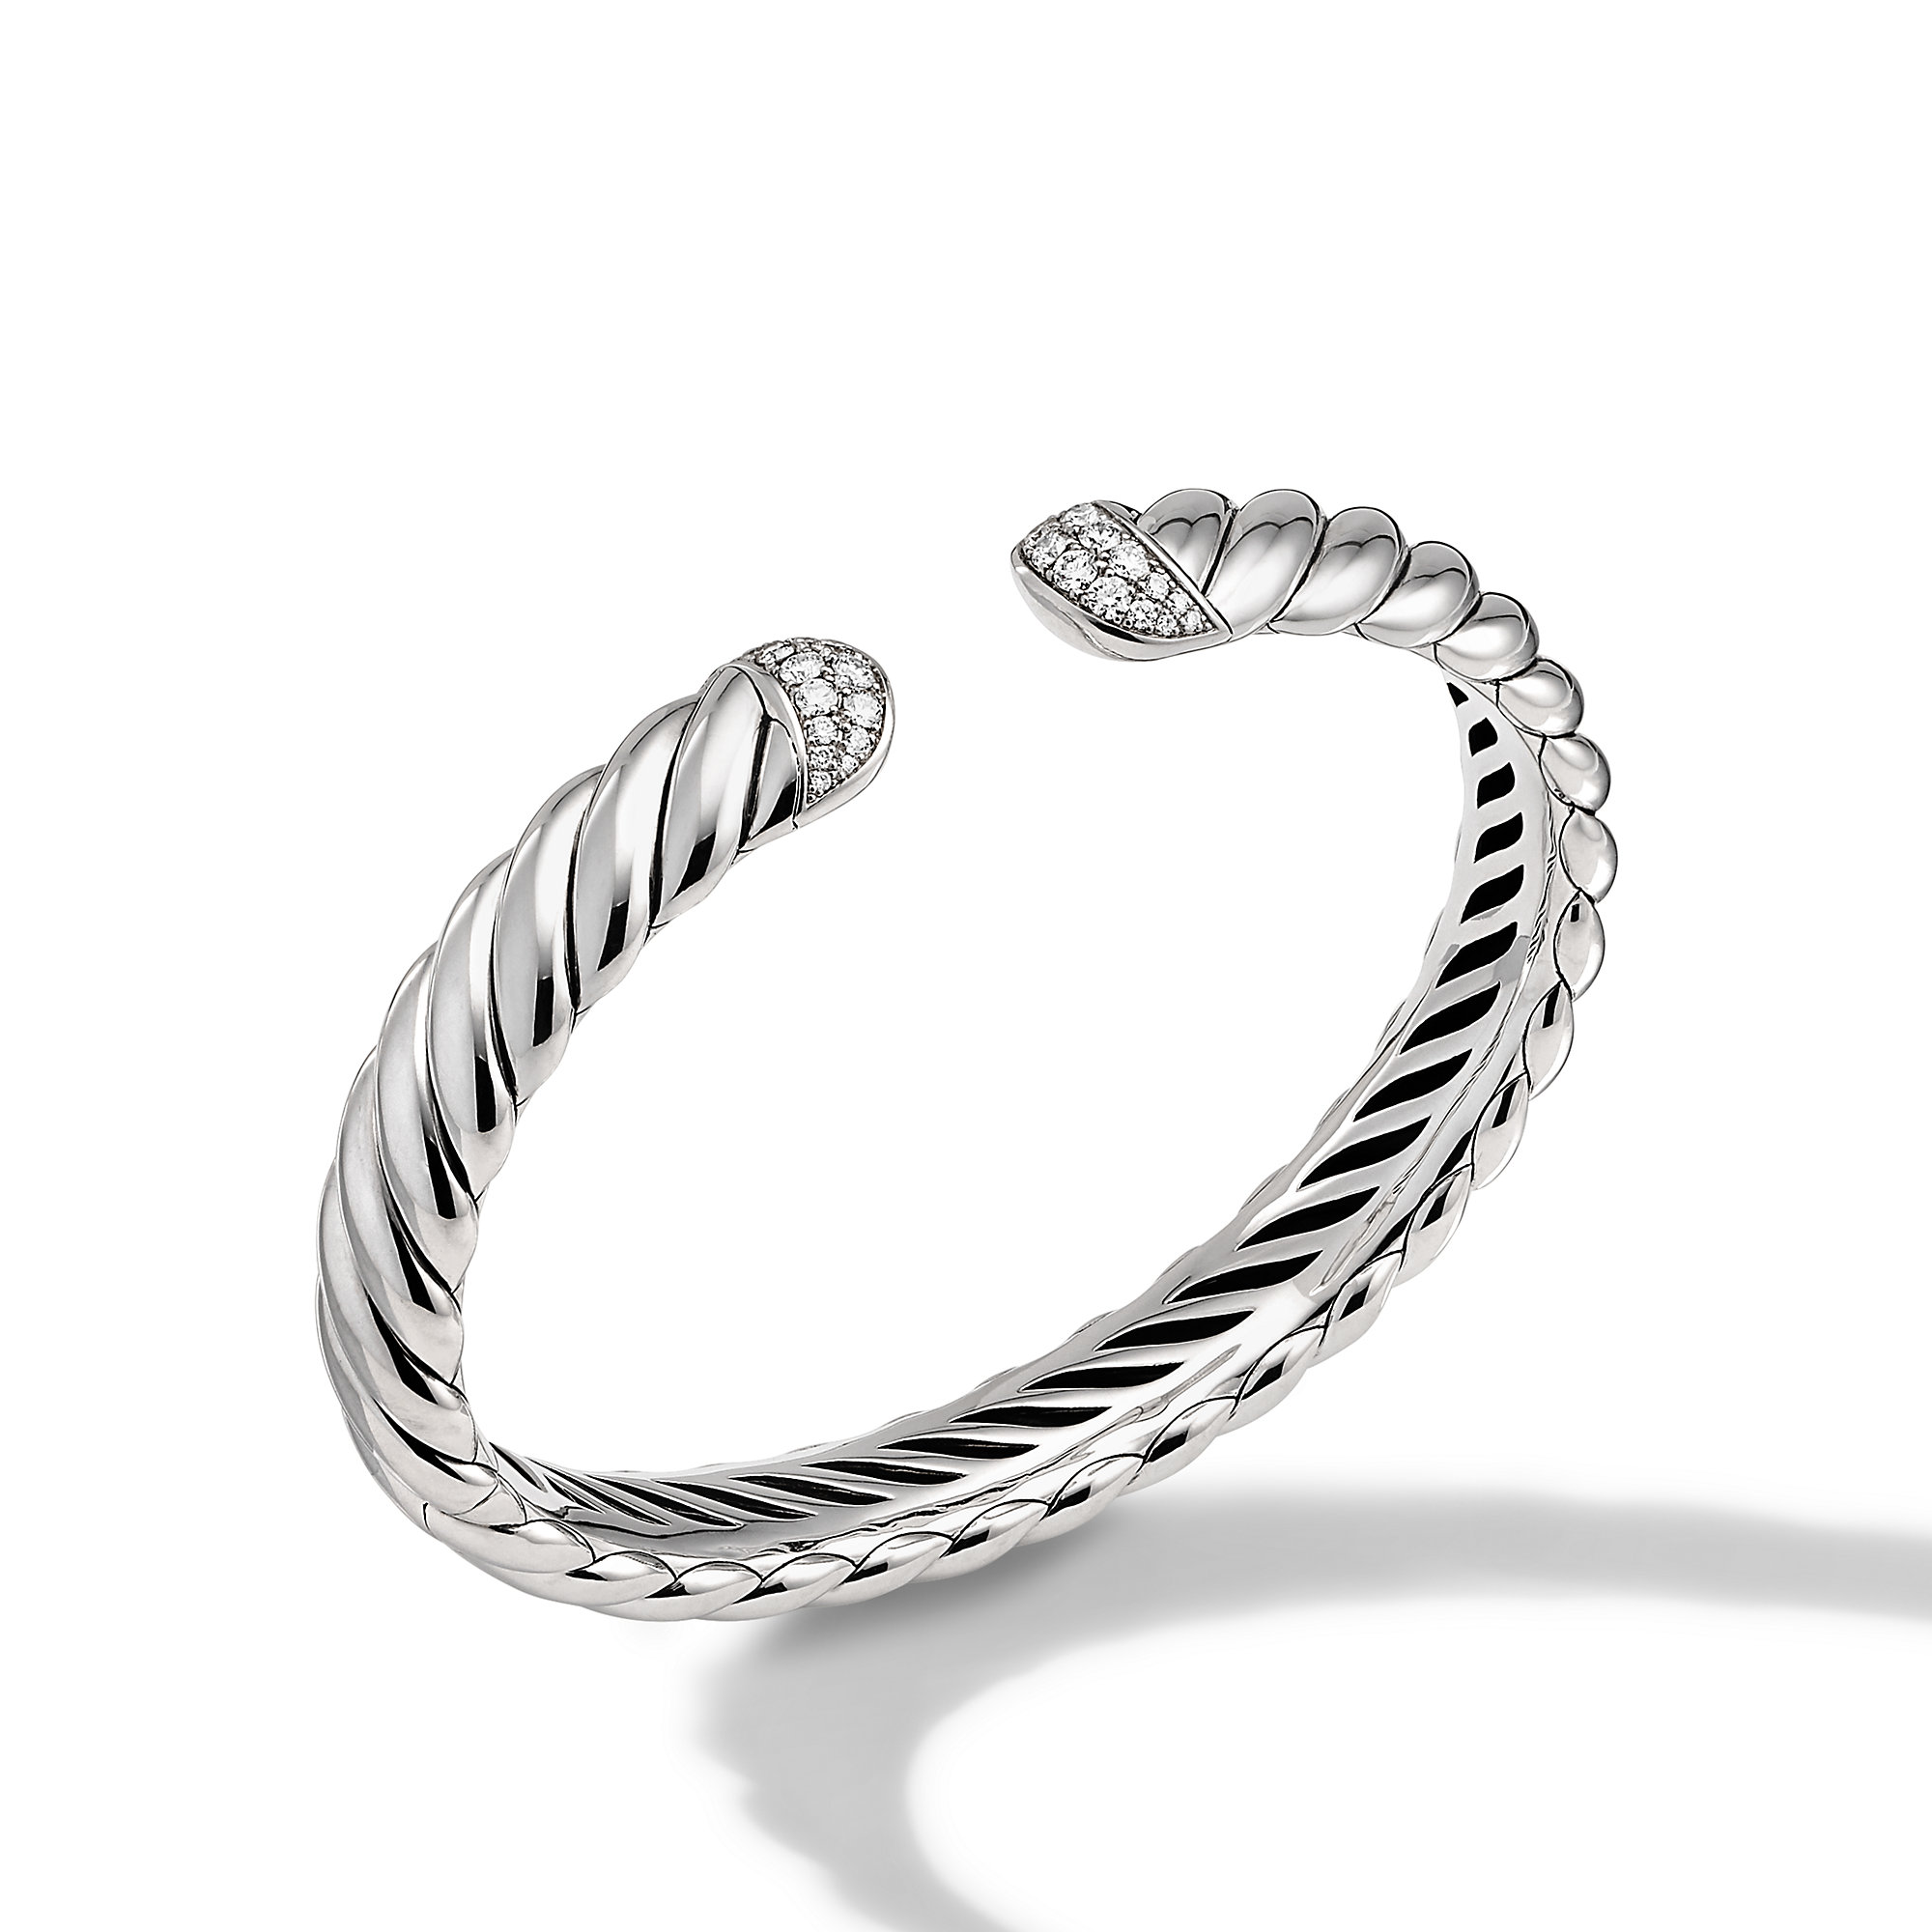 David Yurman 10mm Sculpted Cable Cuff Bracelet with Pave Diamonds, size  medium | Lee Michaels Fine Jewelry stores